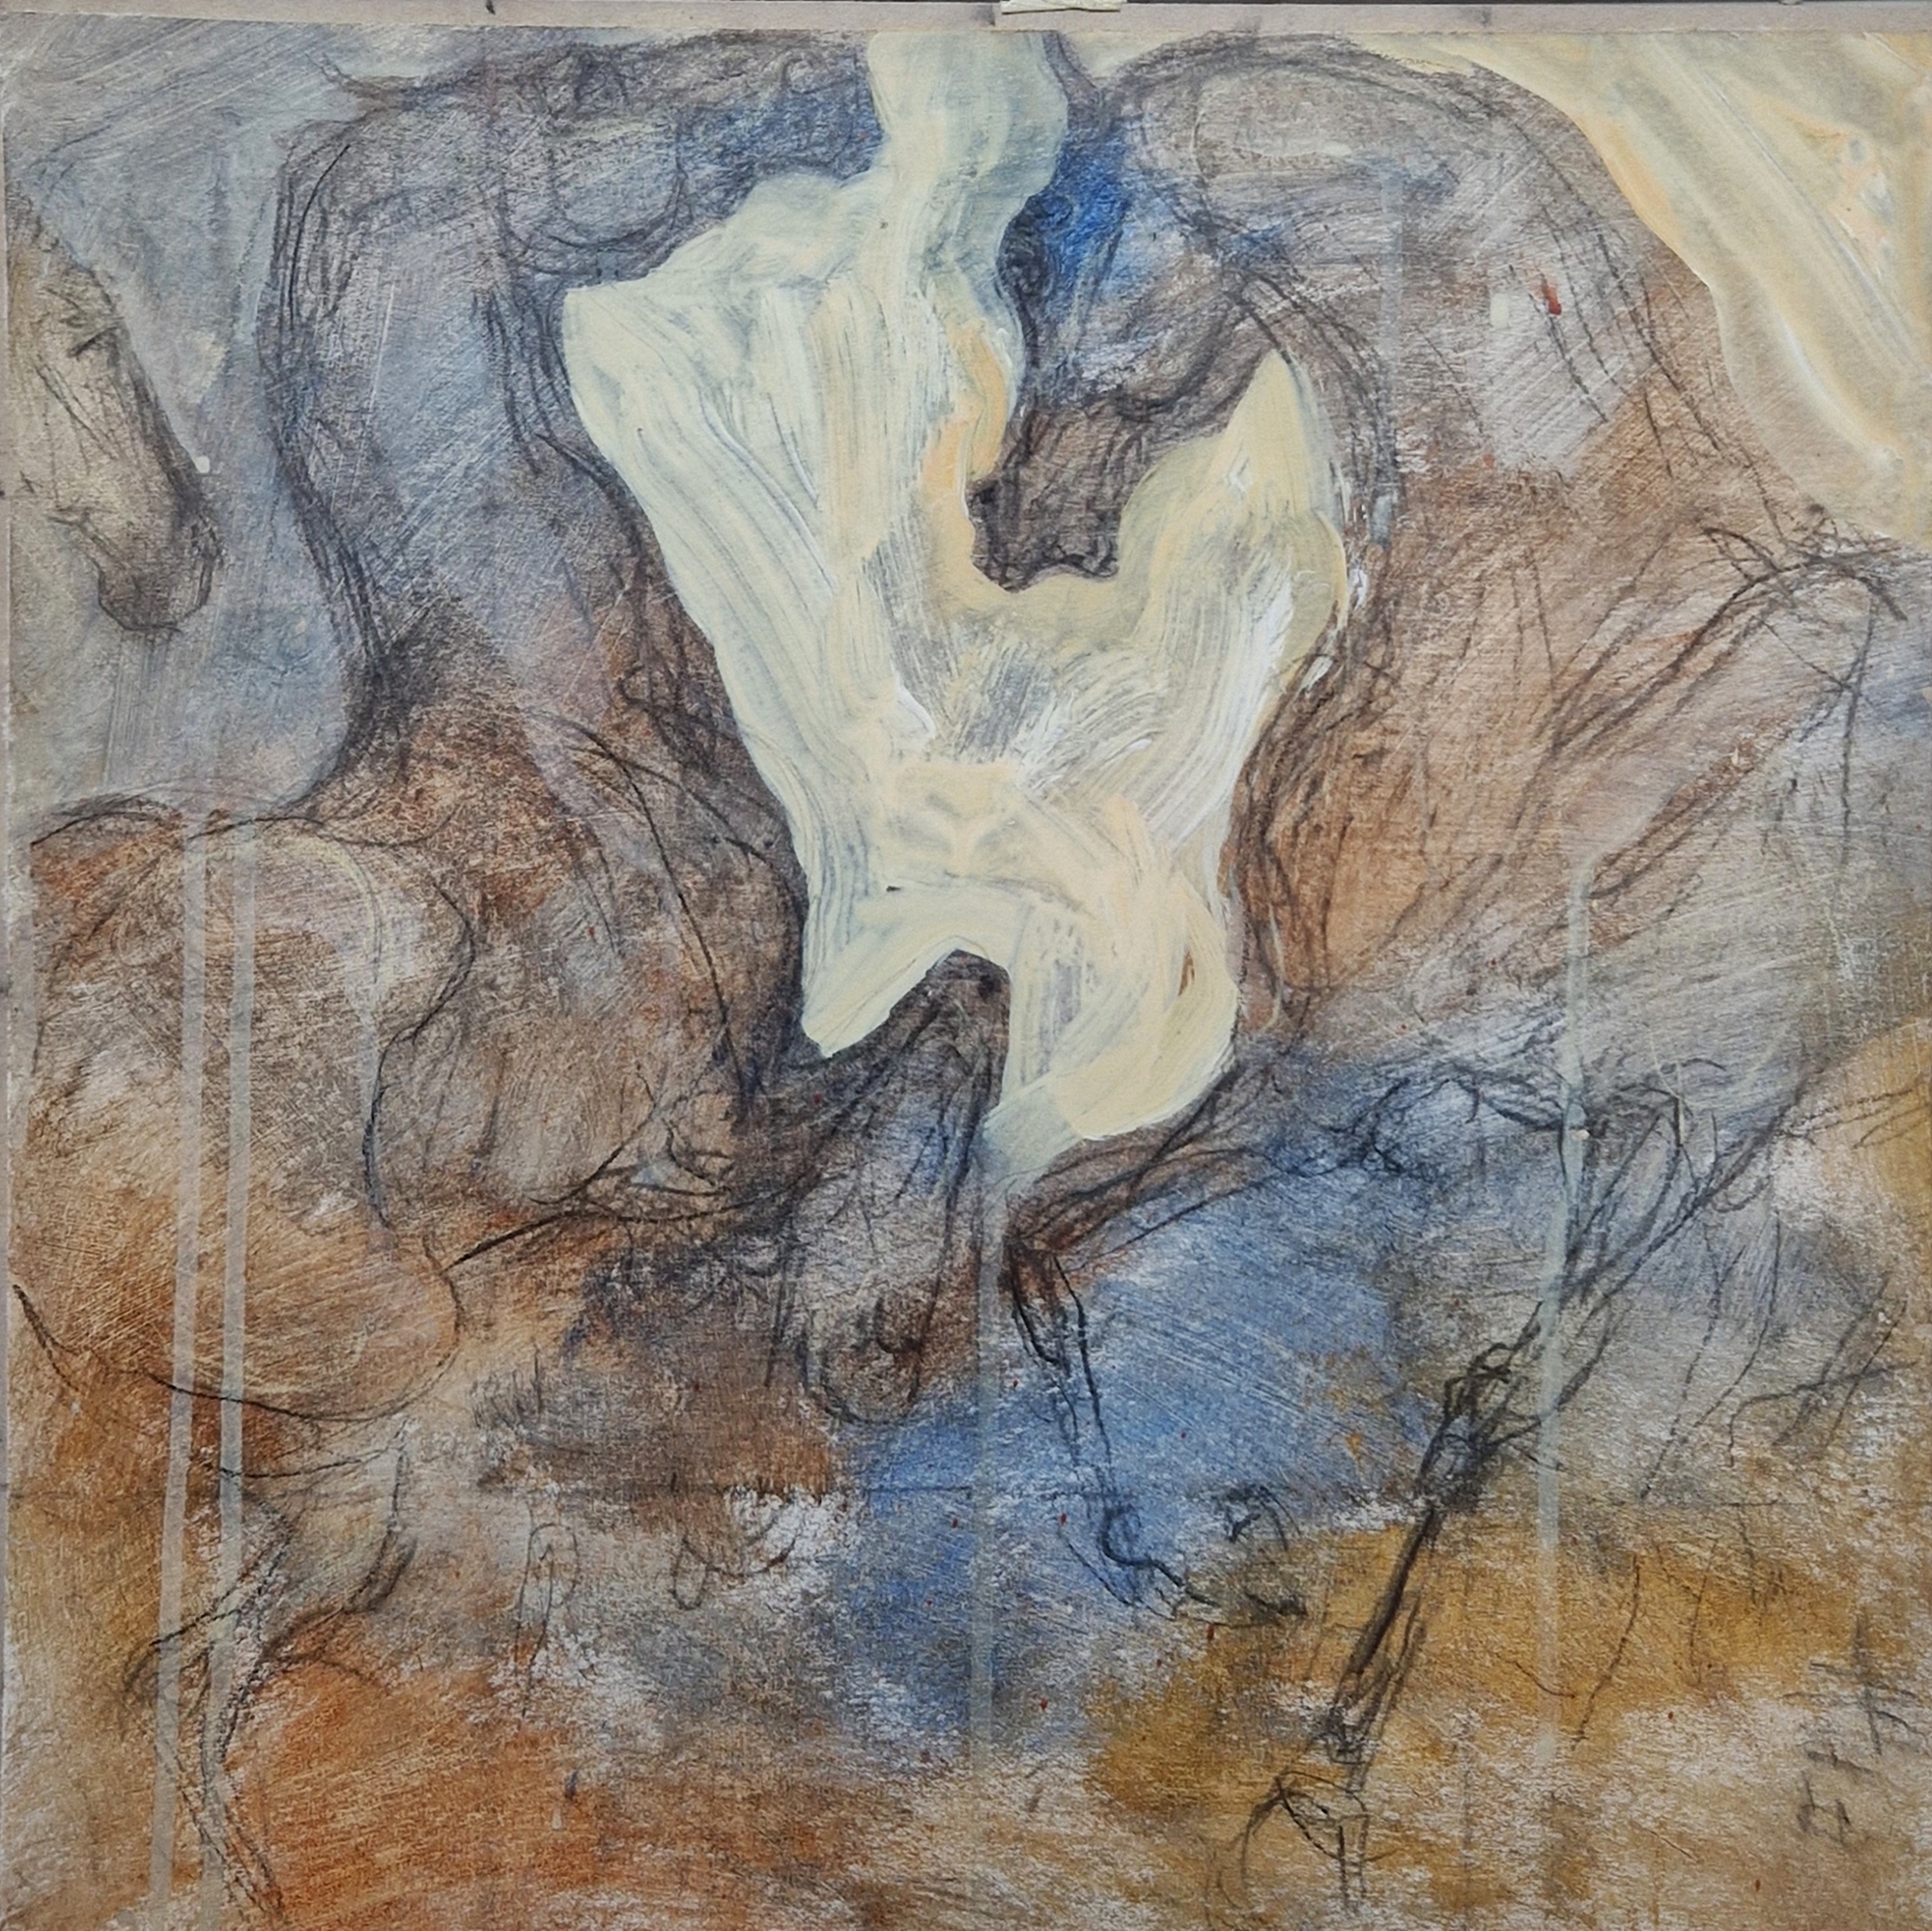 Ellie Hesse  Charcoal and wash drawing “Encounter II”, study of two horses, 39cm square